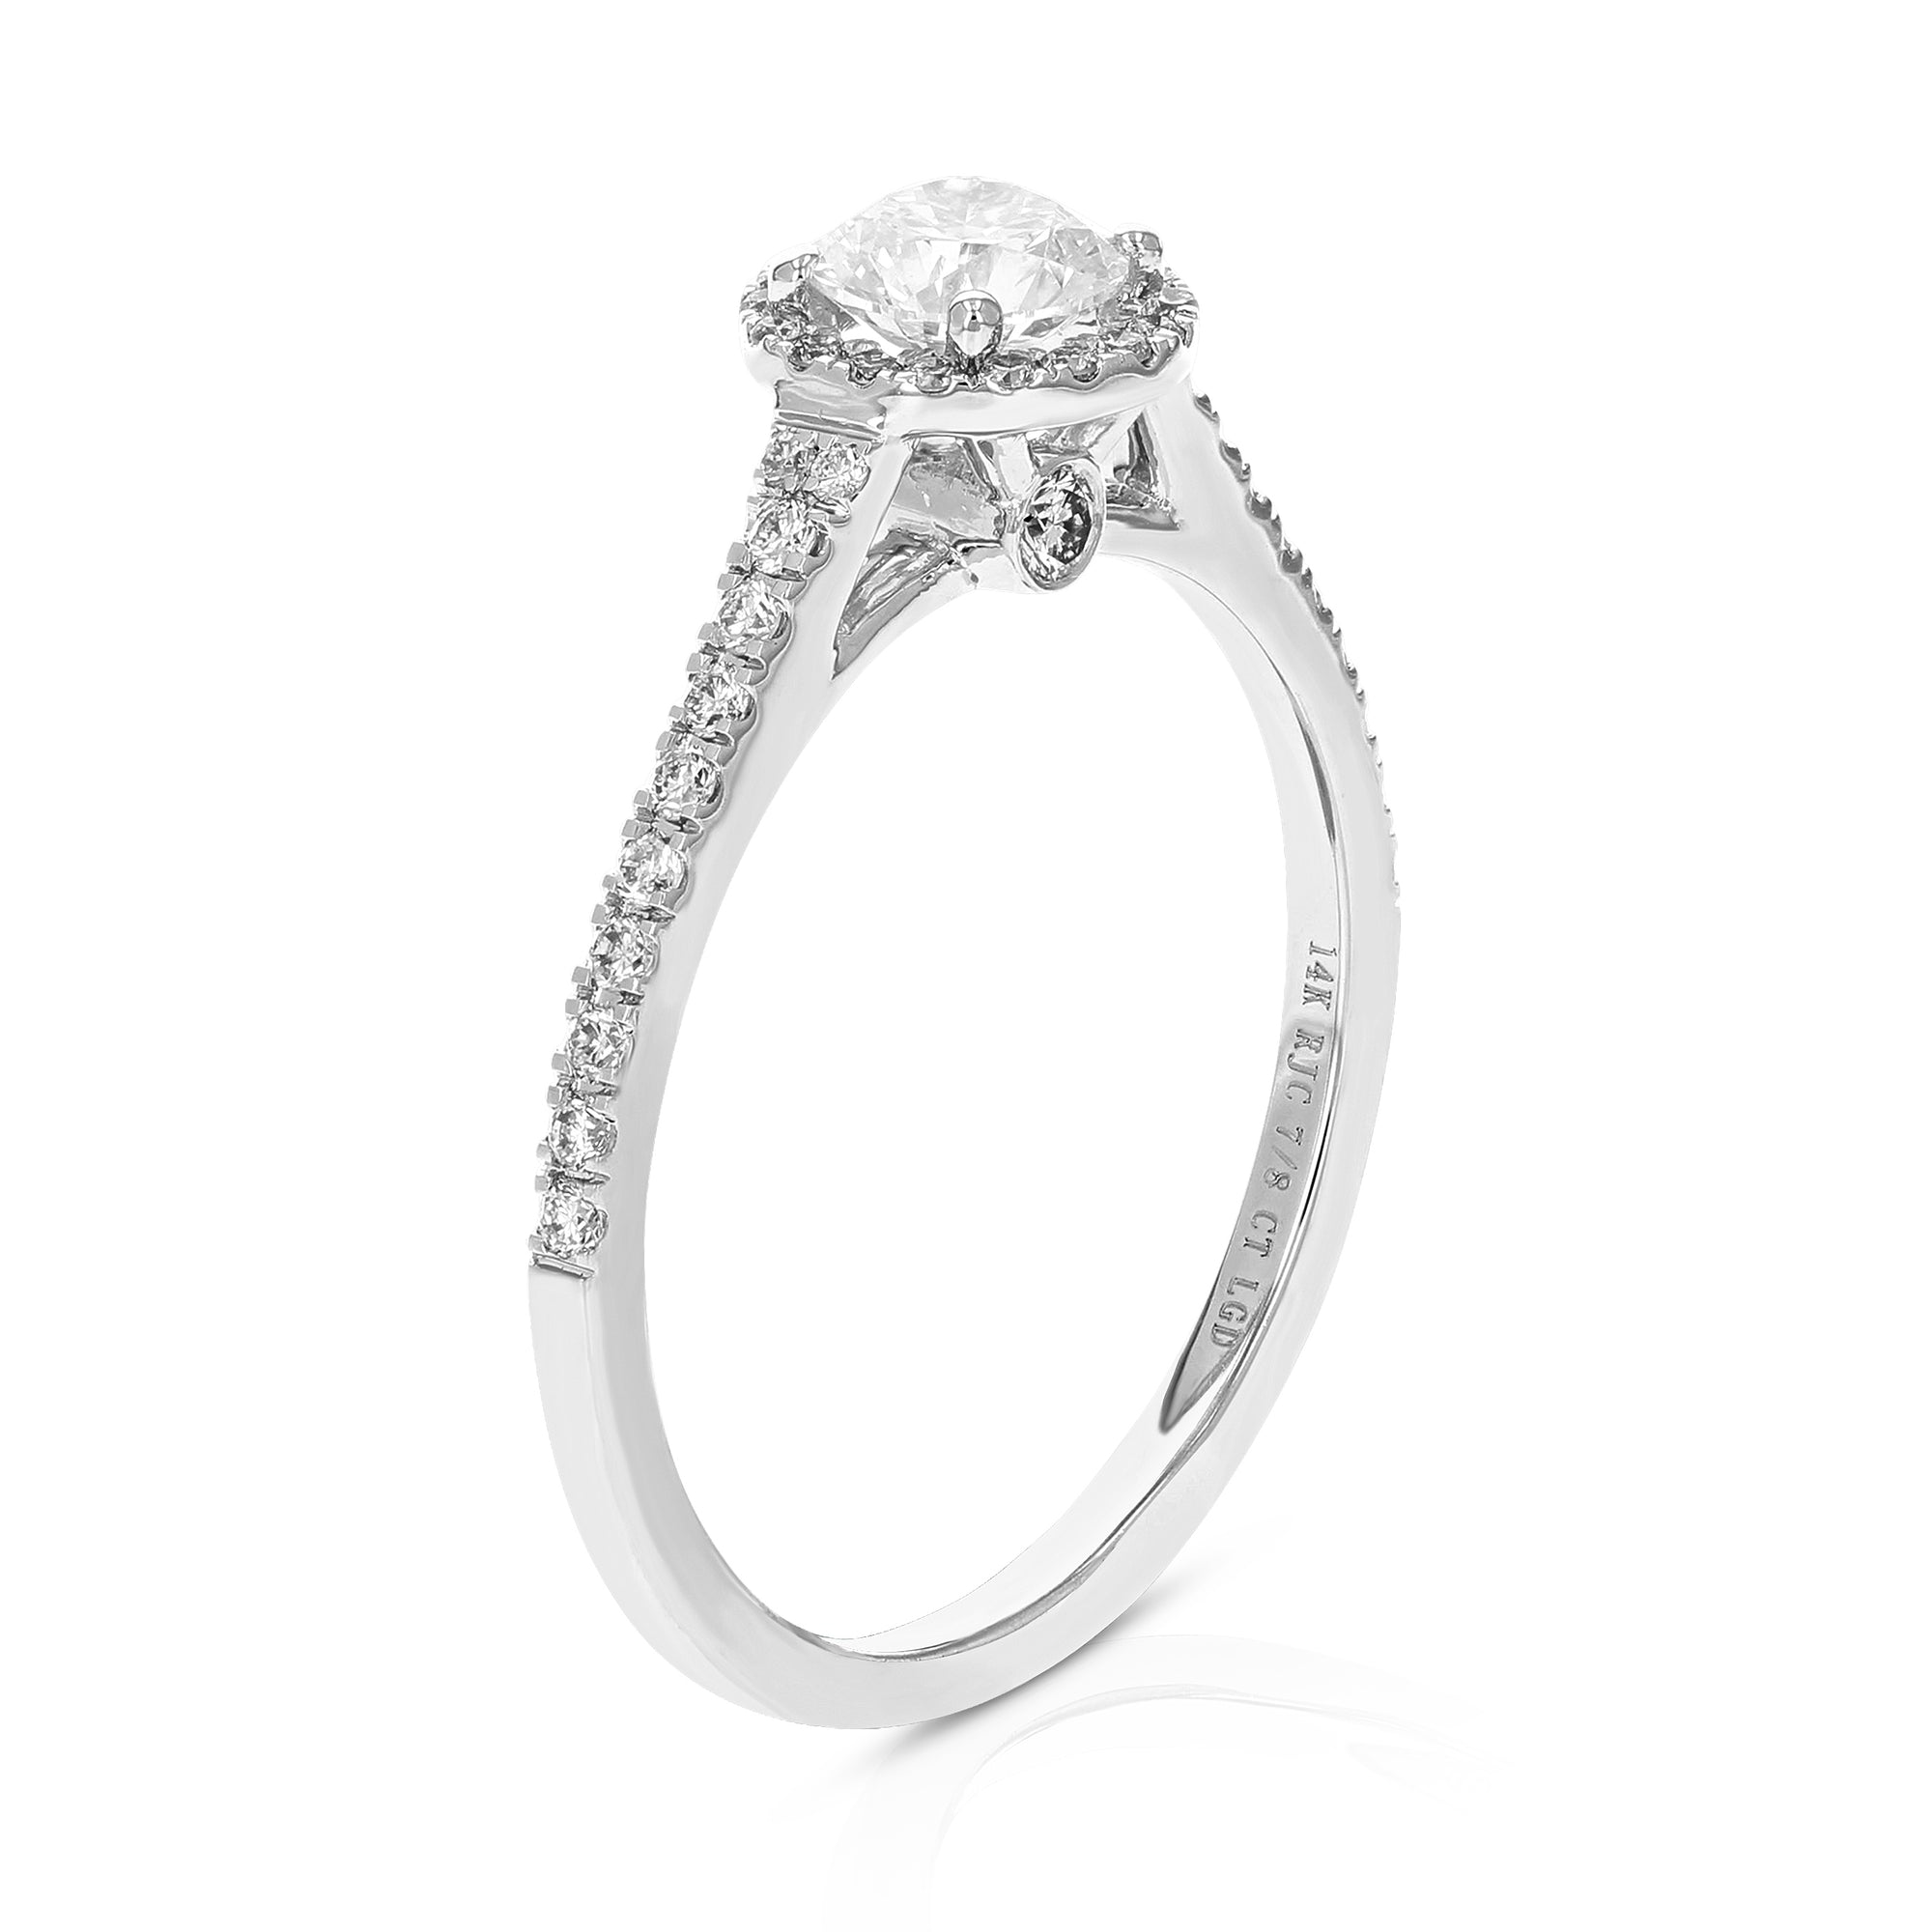 7/8 cttw Wedding Engagement Ring for Women, Round Lab Grown Diamond Ring in 14K White Gold, Prong Setting